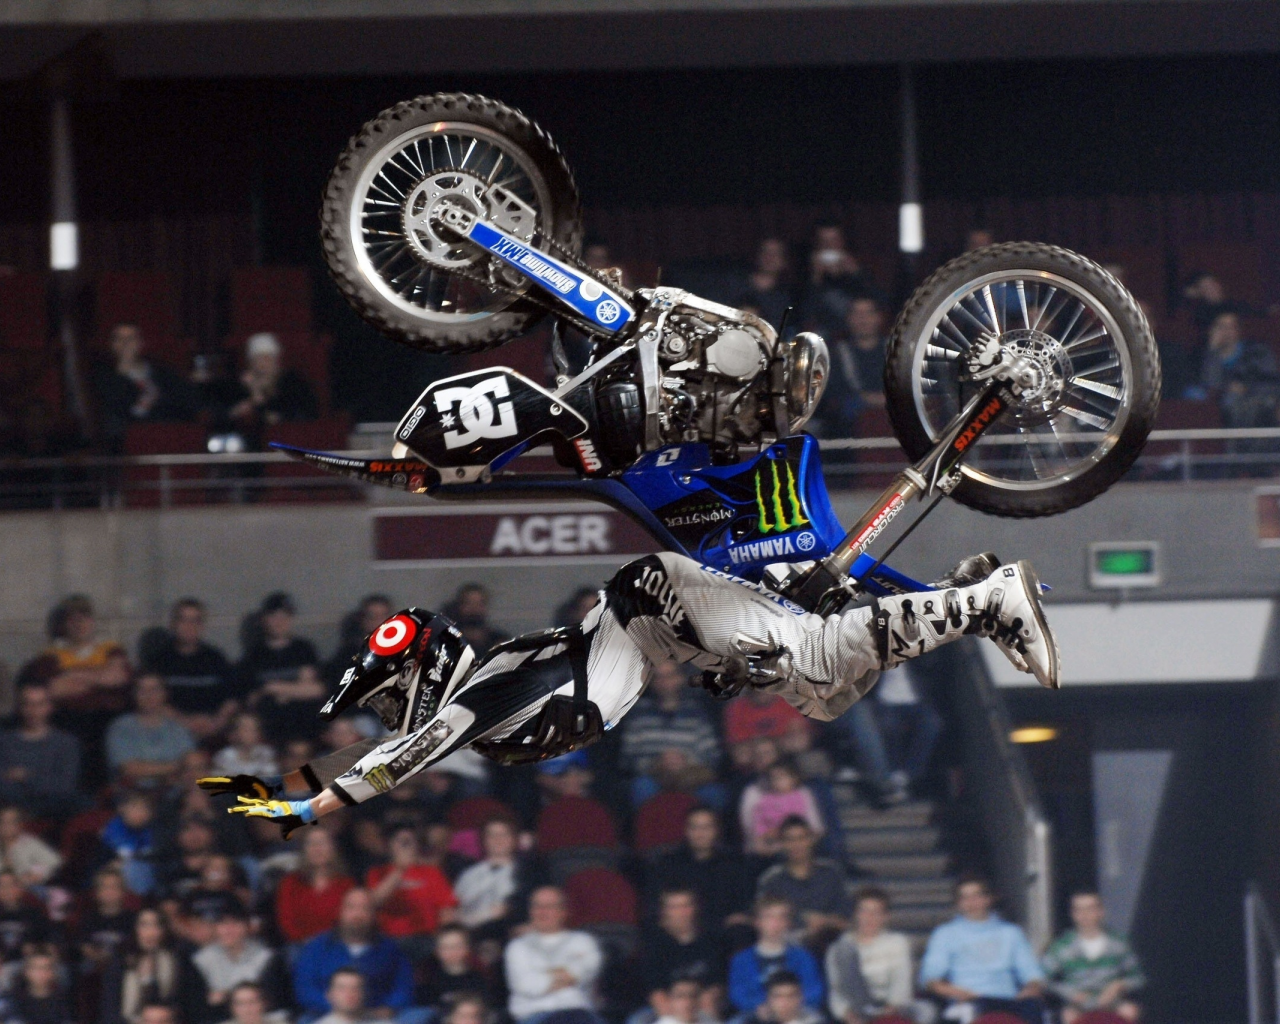 x-fighters, 1920x1200, x-games, rom, wallpapers, дадя васяe, 2011